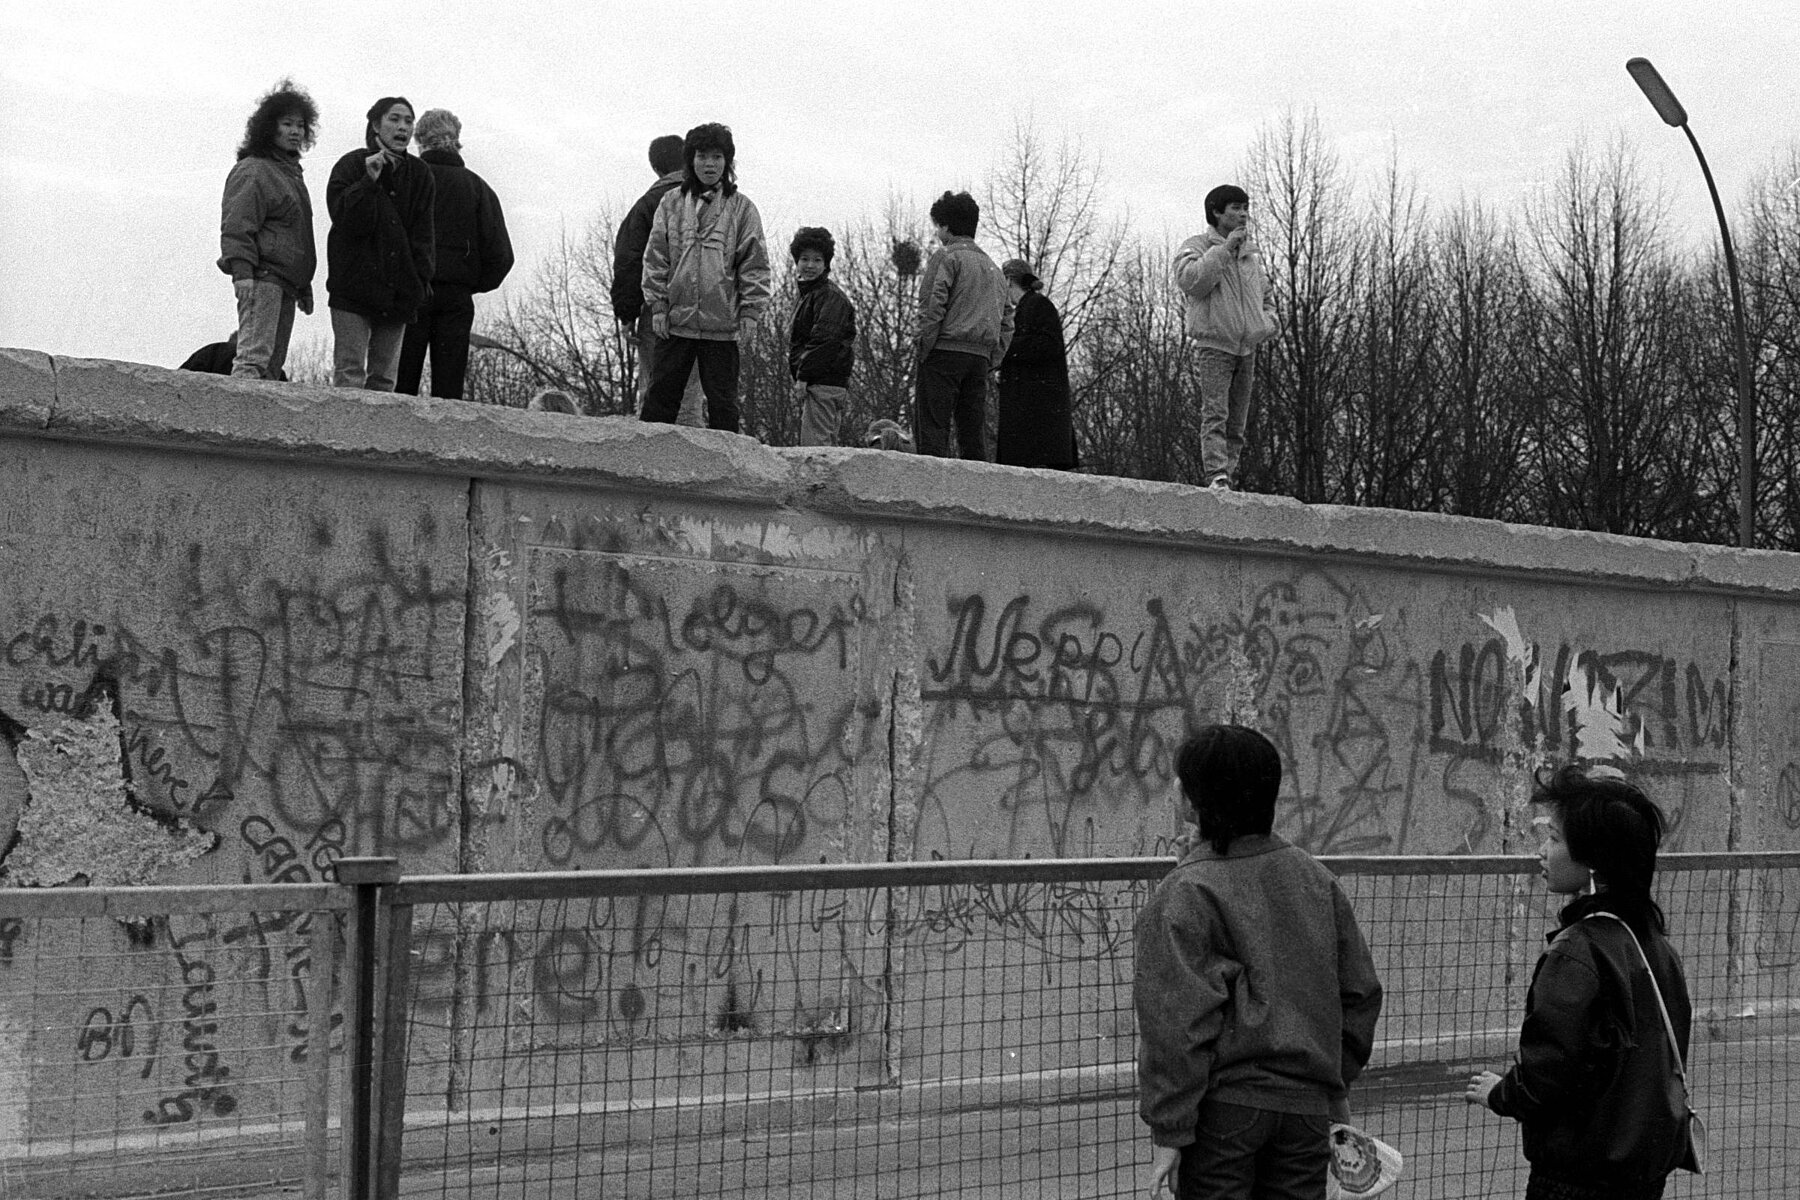 View of the Berlin Wall with graffiti. On the wall are several Asian persons facing each other. 